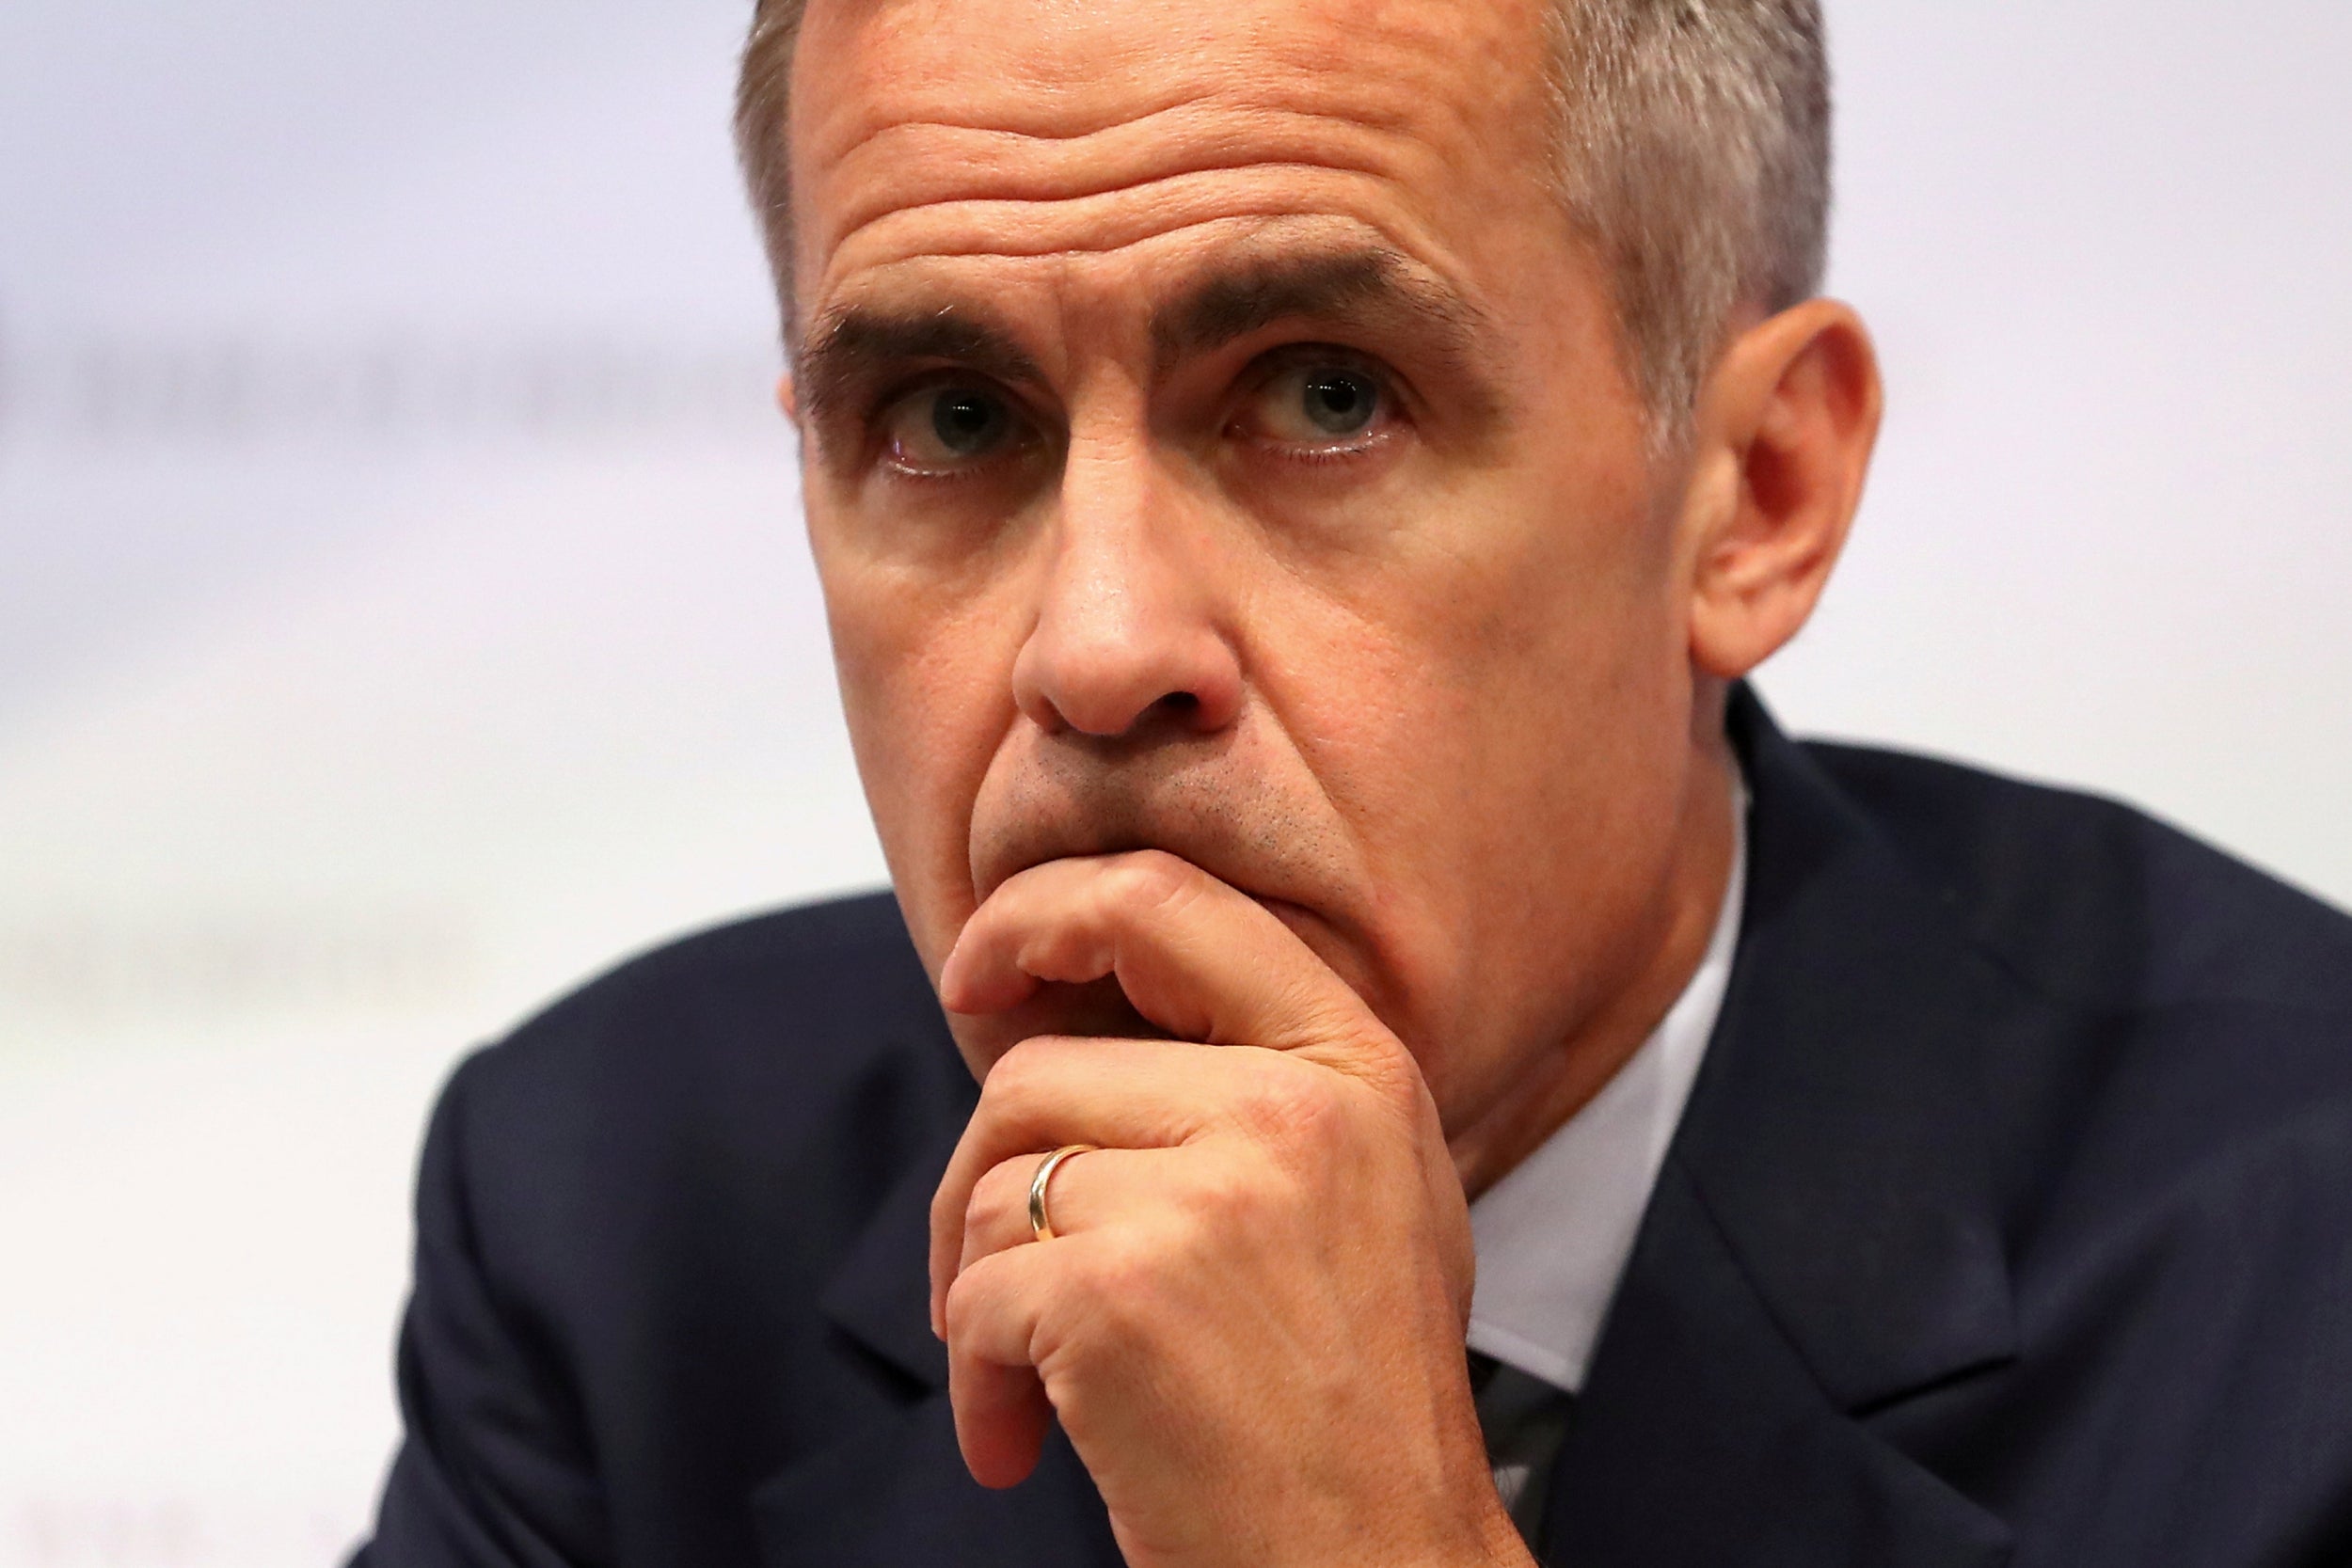 A worried man? Bank of England governor Mark Carney doesn't have good cards it comes to handling Brexit